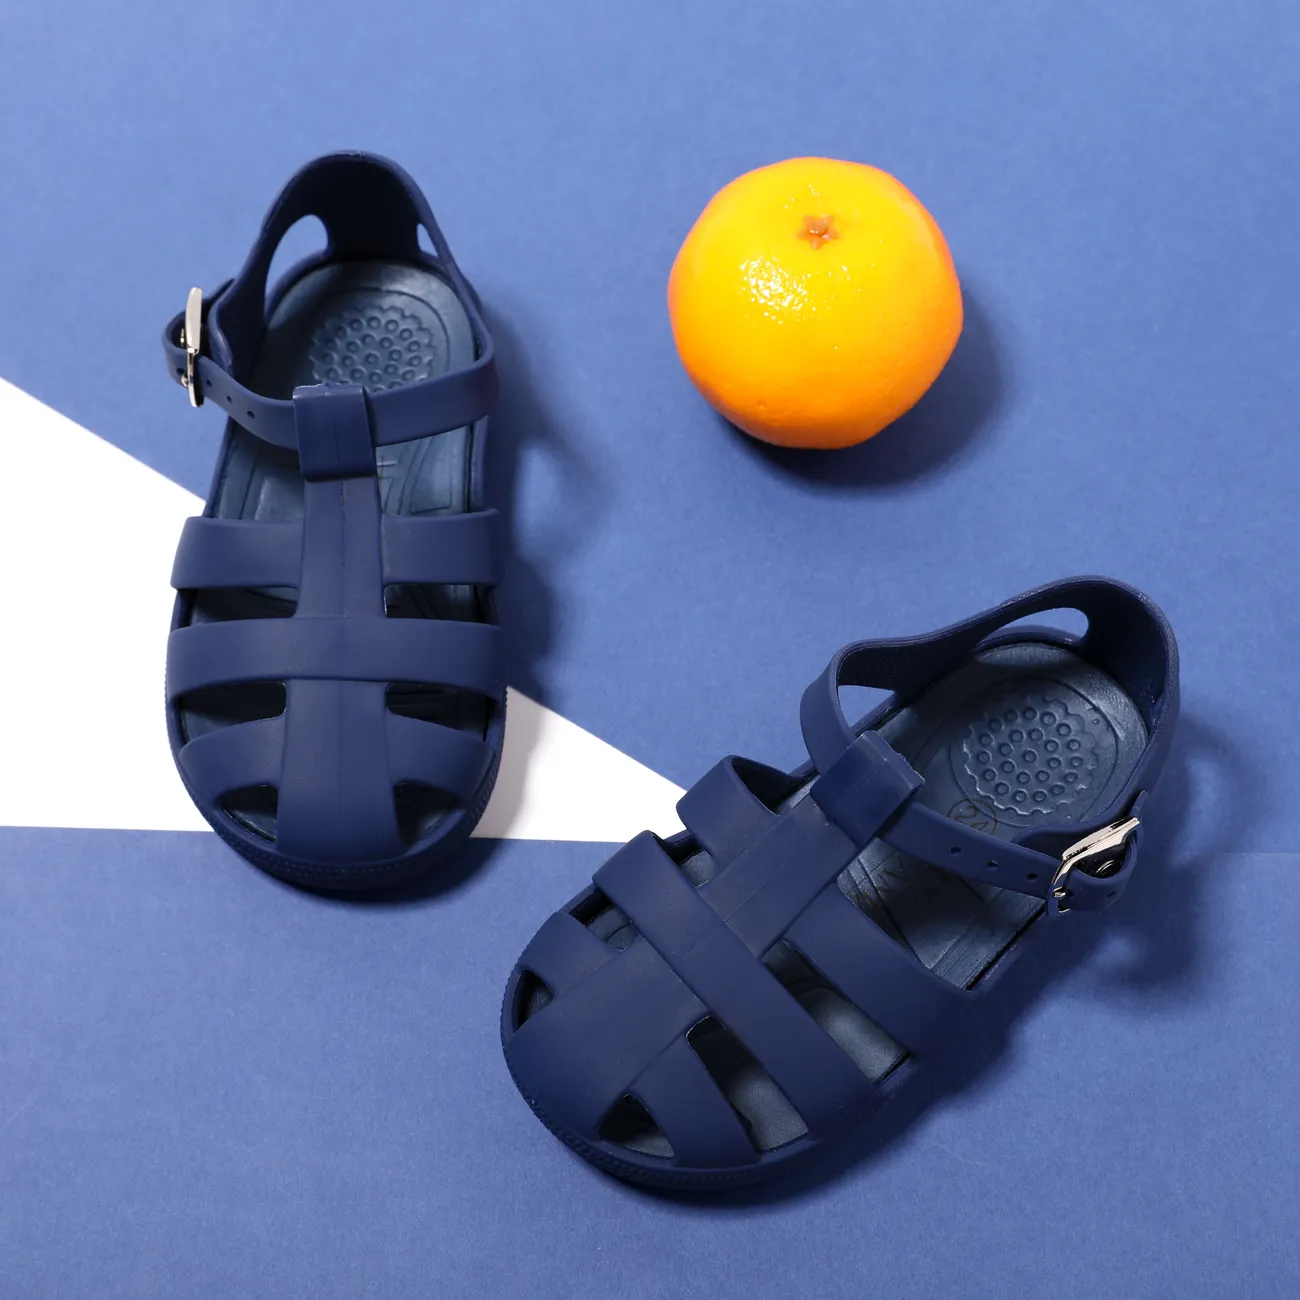 Toddler/Kid Girl/Boy Casual Style Solid Color Soft Sole Sandals Deep Blue big image 1